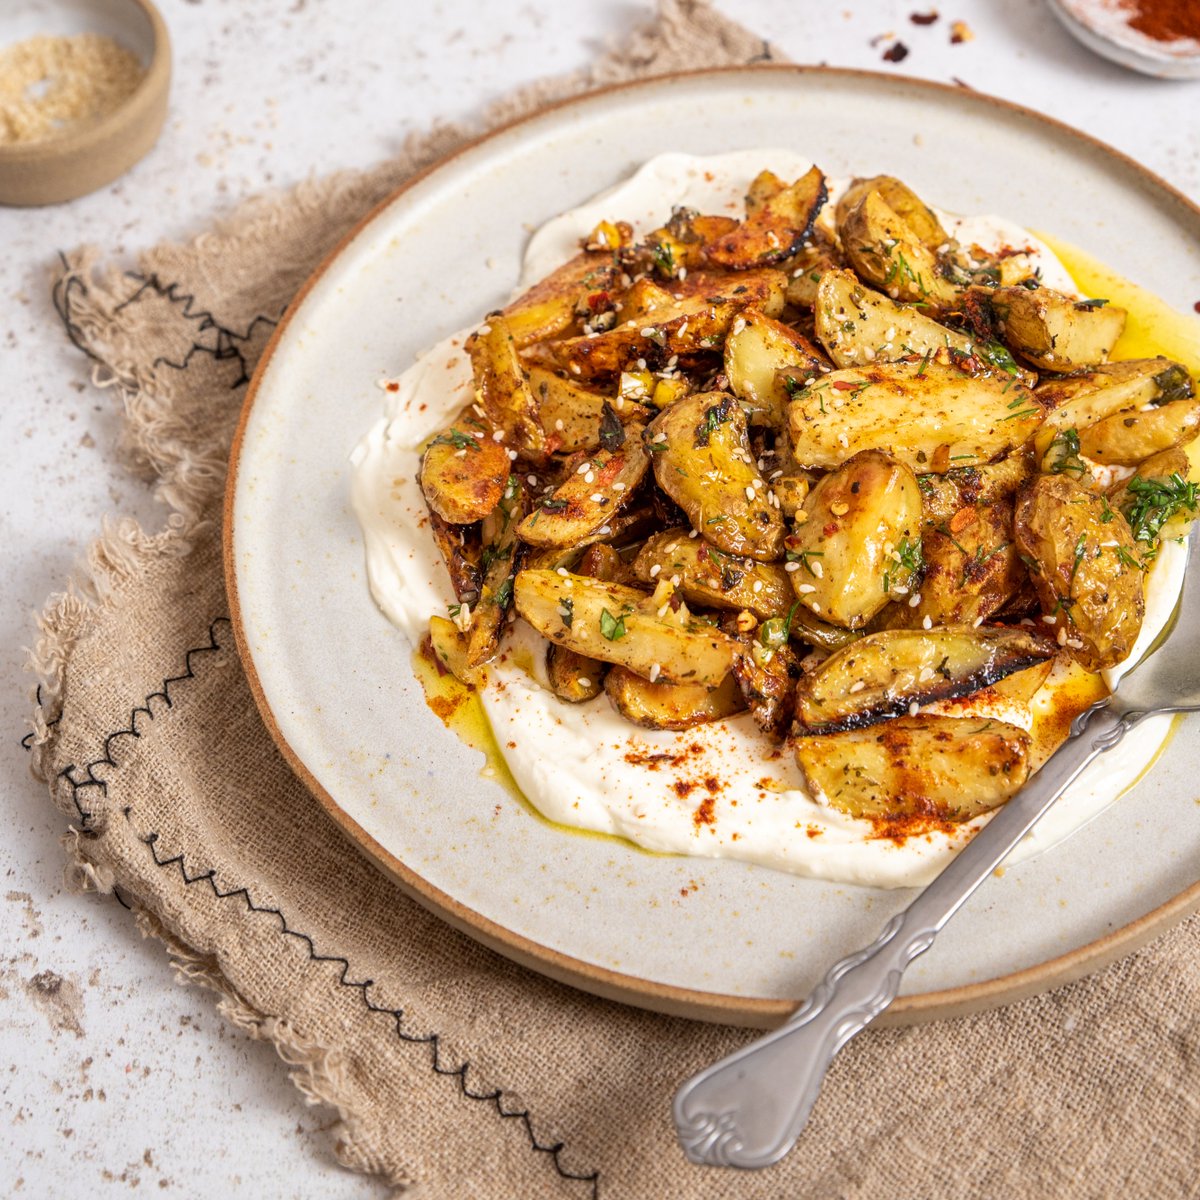 Looking for inspiration for your Father’s Day feast? Try making these crispy oregano #JerseyRoyals with a creamy feta dip. The perfect match for a succulent steak to make dad’s day! Head to the link below for the recipe jerseyroyals.co.uk/recipe/jersey-… #SimplySeasonal